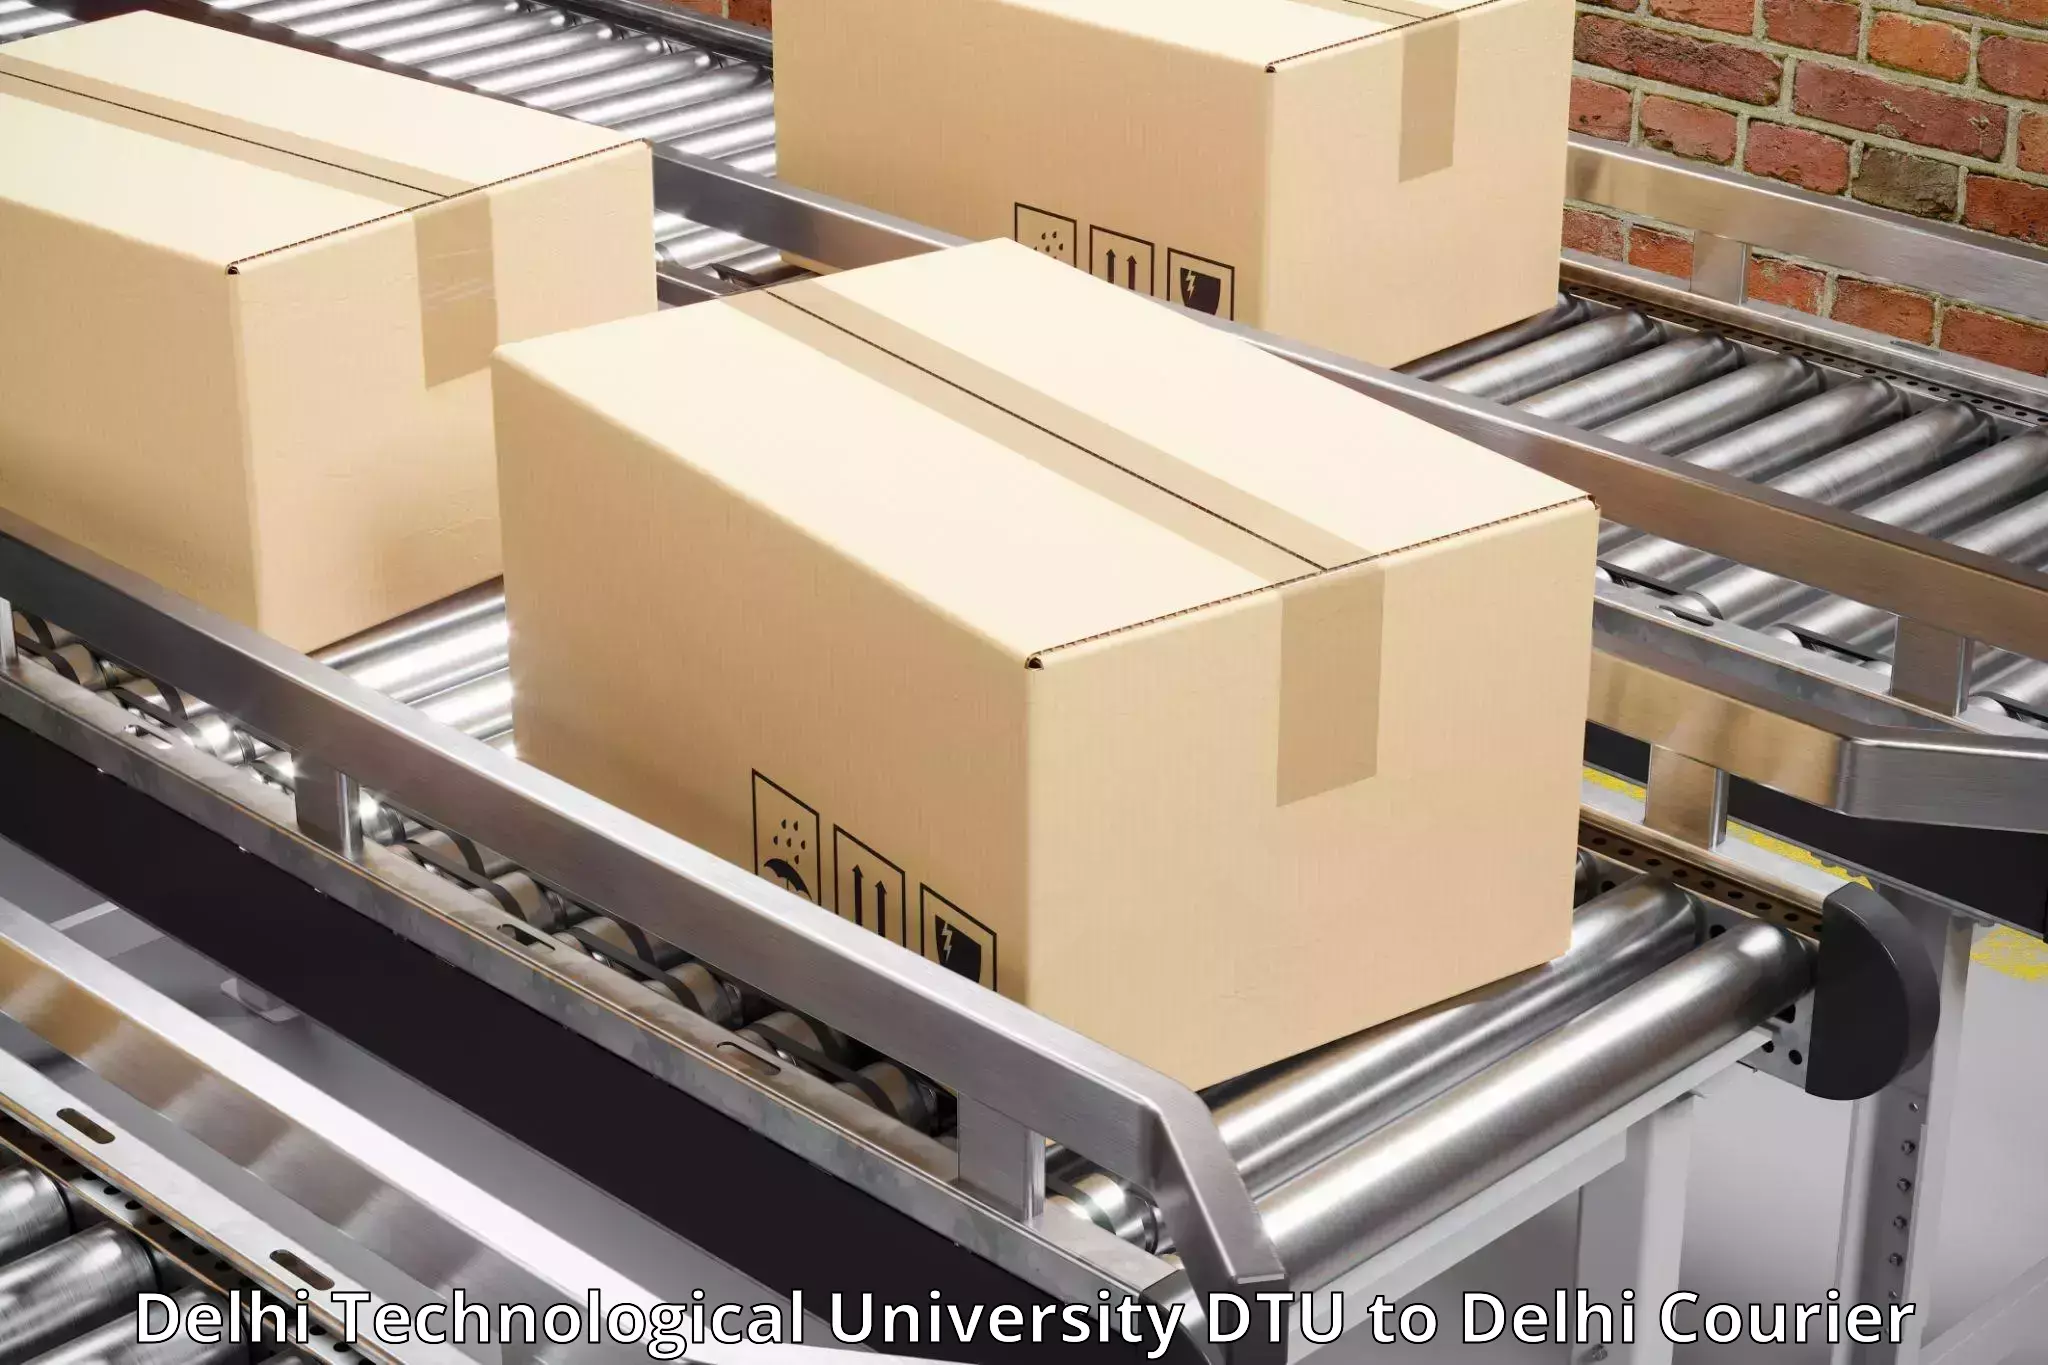 Package tracking Delhi Technological University DTU to Lodhi Road